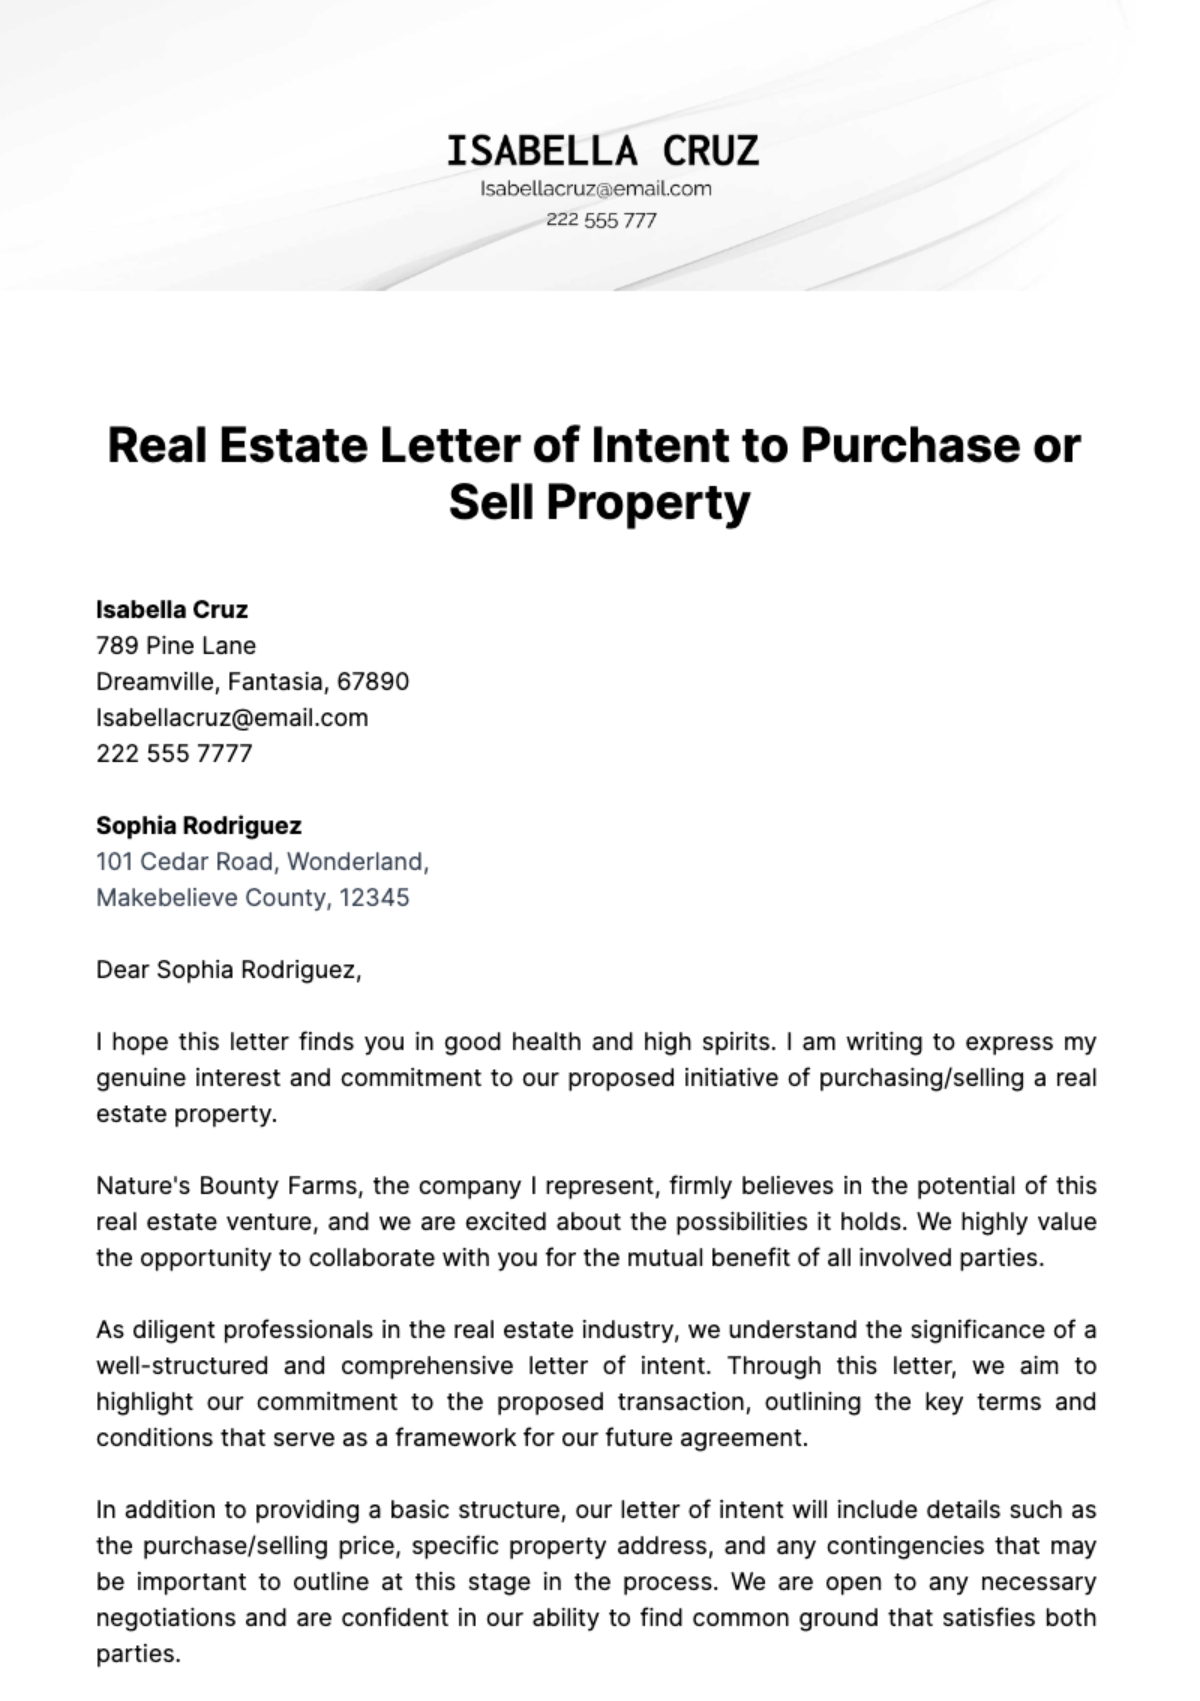 Free Real Estate Letter of Intent to Purchase or Sell Property Template